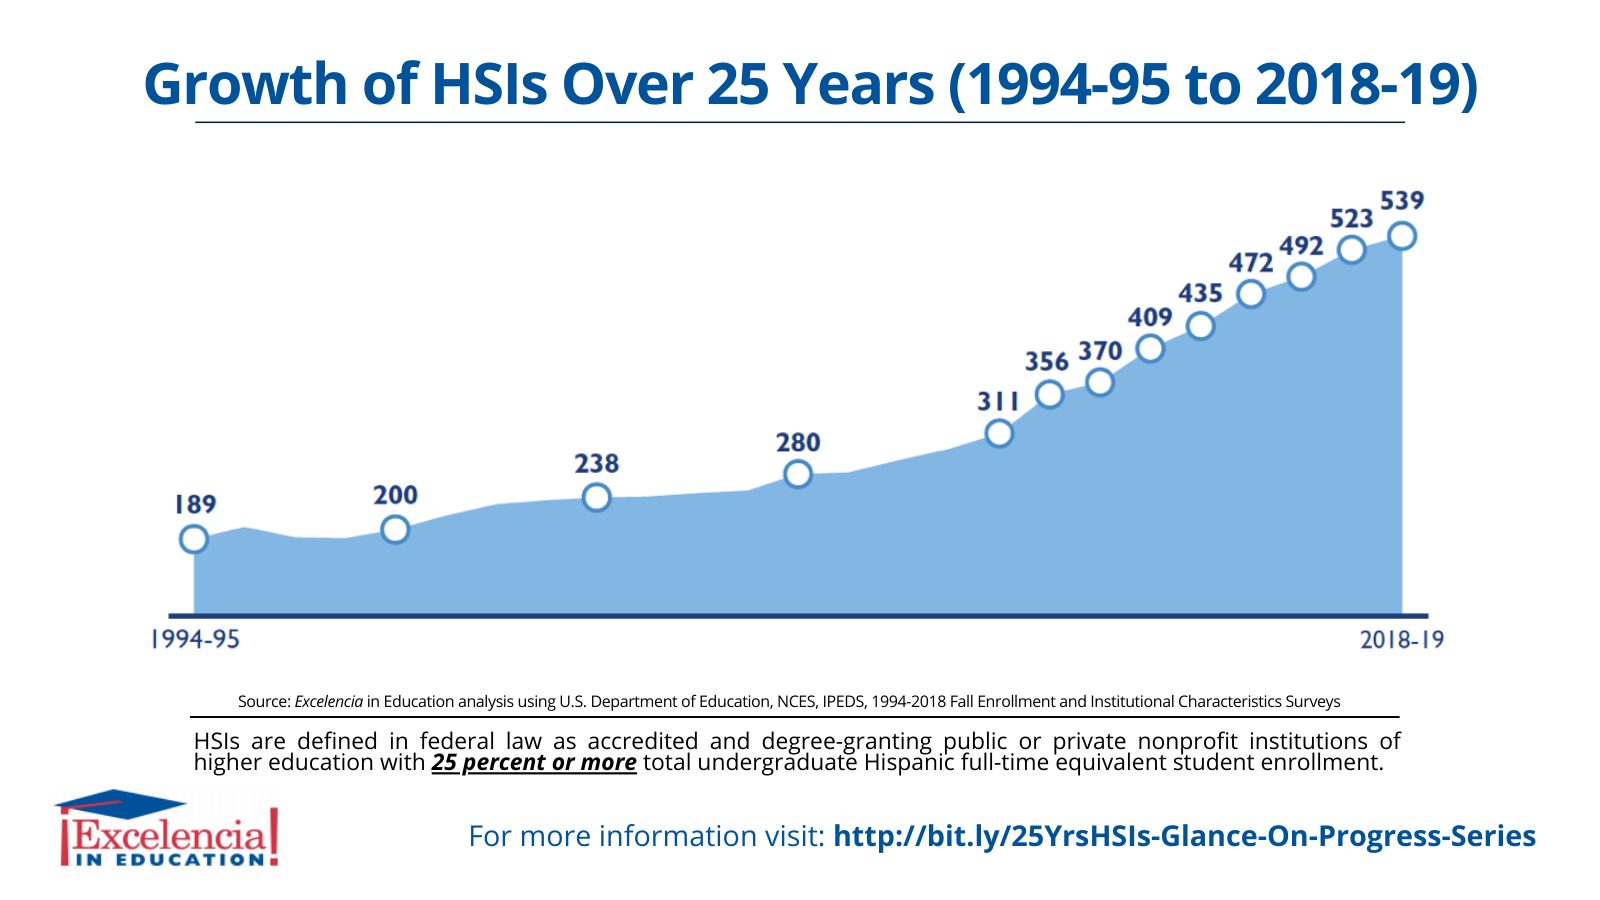 Infographic-Growth of HSIs Over 25 Years 